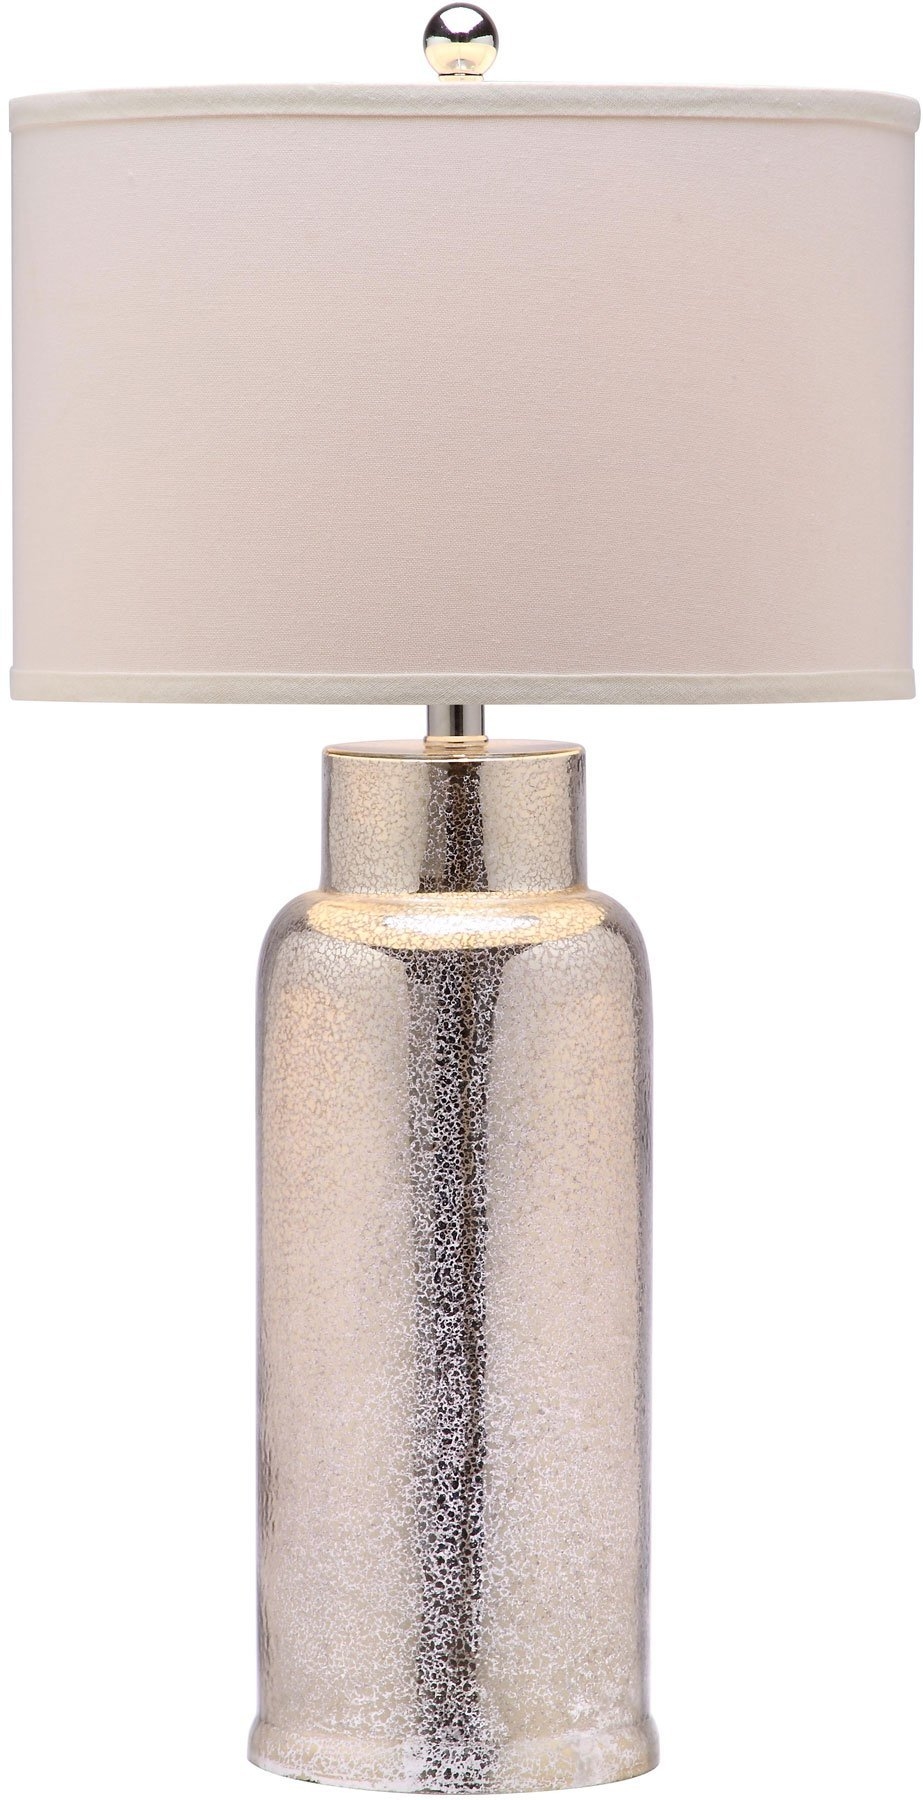 Bottle 29-Inch H Glass Table Lamp - Ivory/Silver - Arlo Home - Image 1